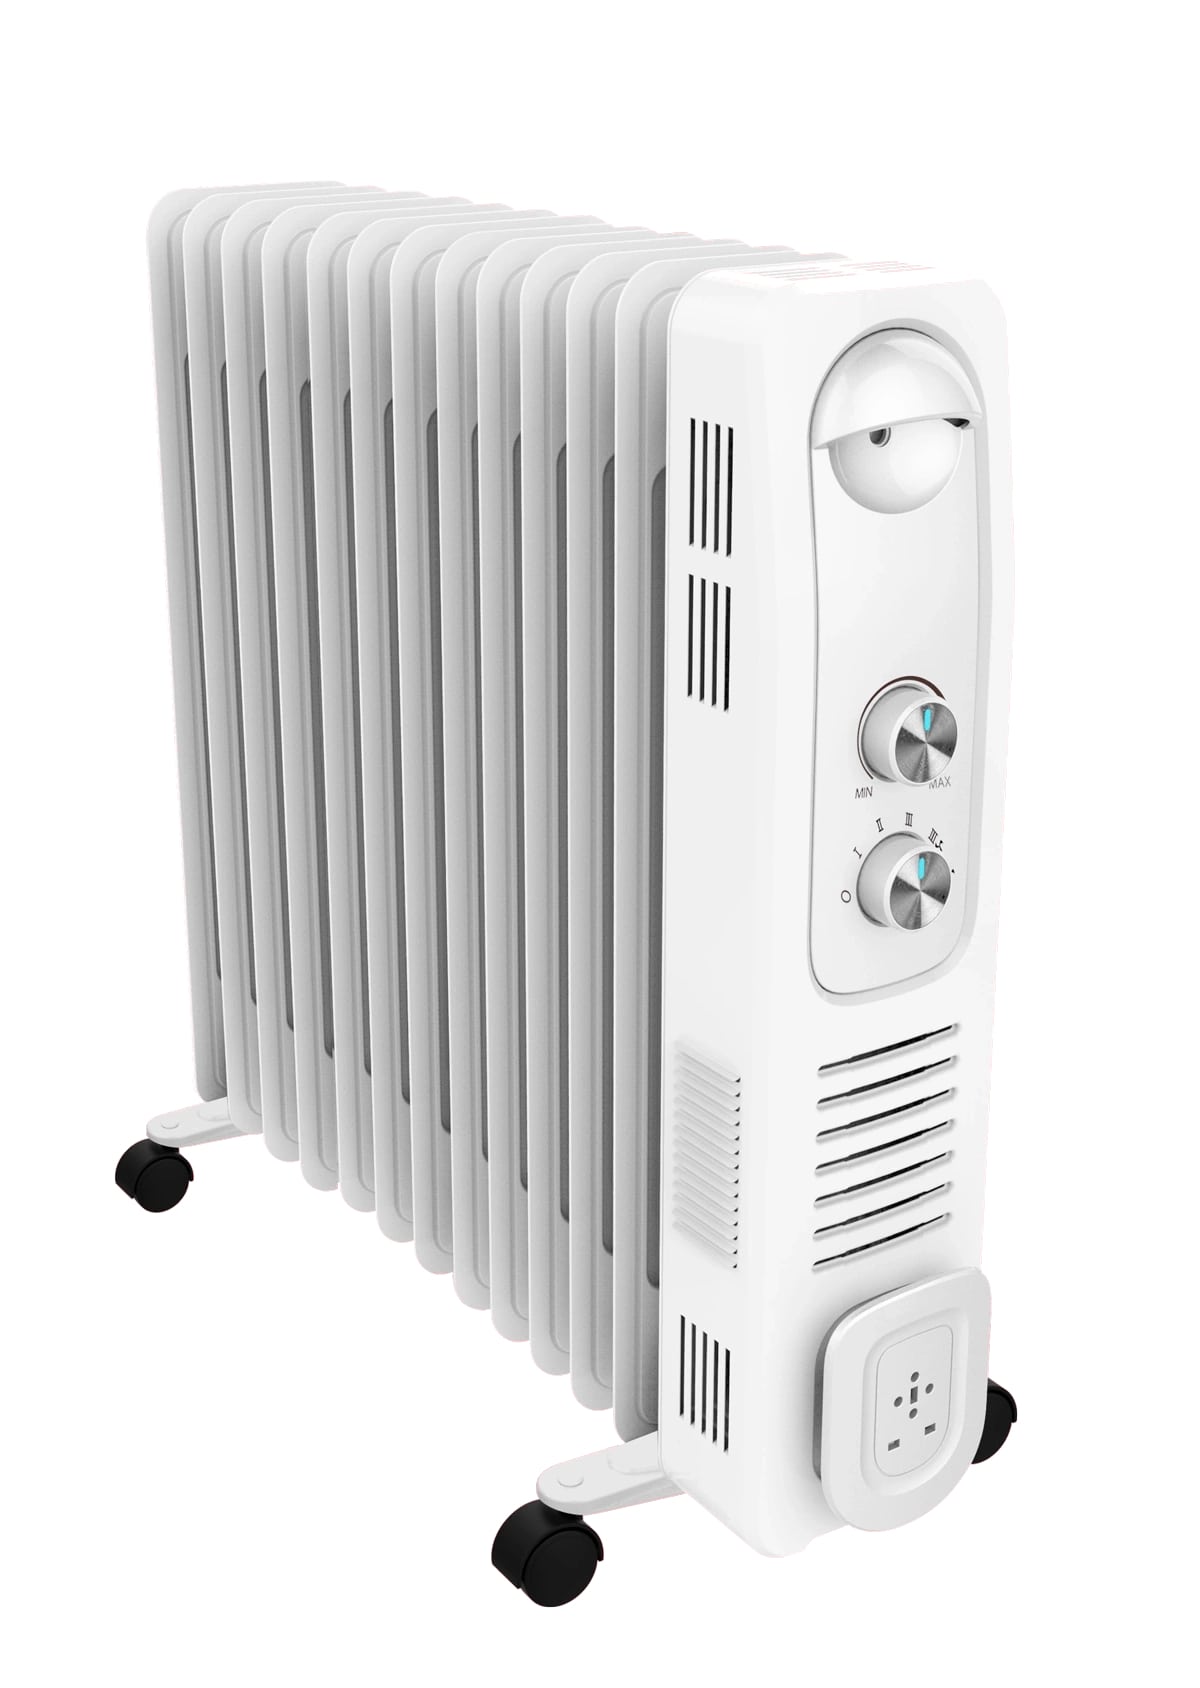 Electromatic Oil Filled Radiator 13 Fins 2500 W With clothes rack and fan Full safety system